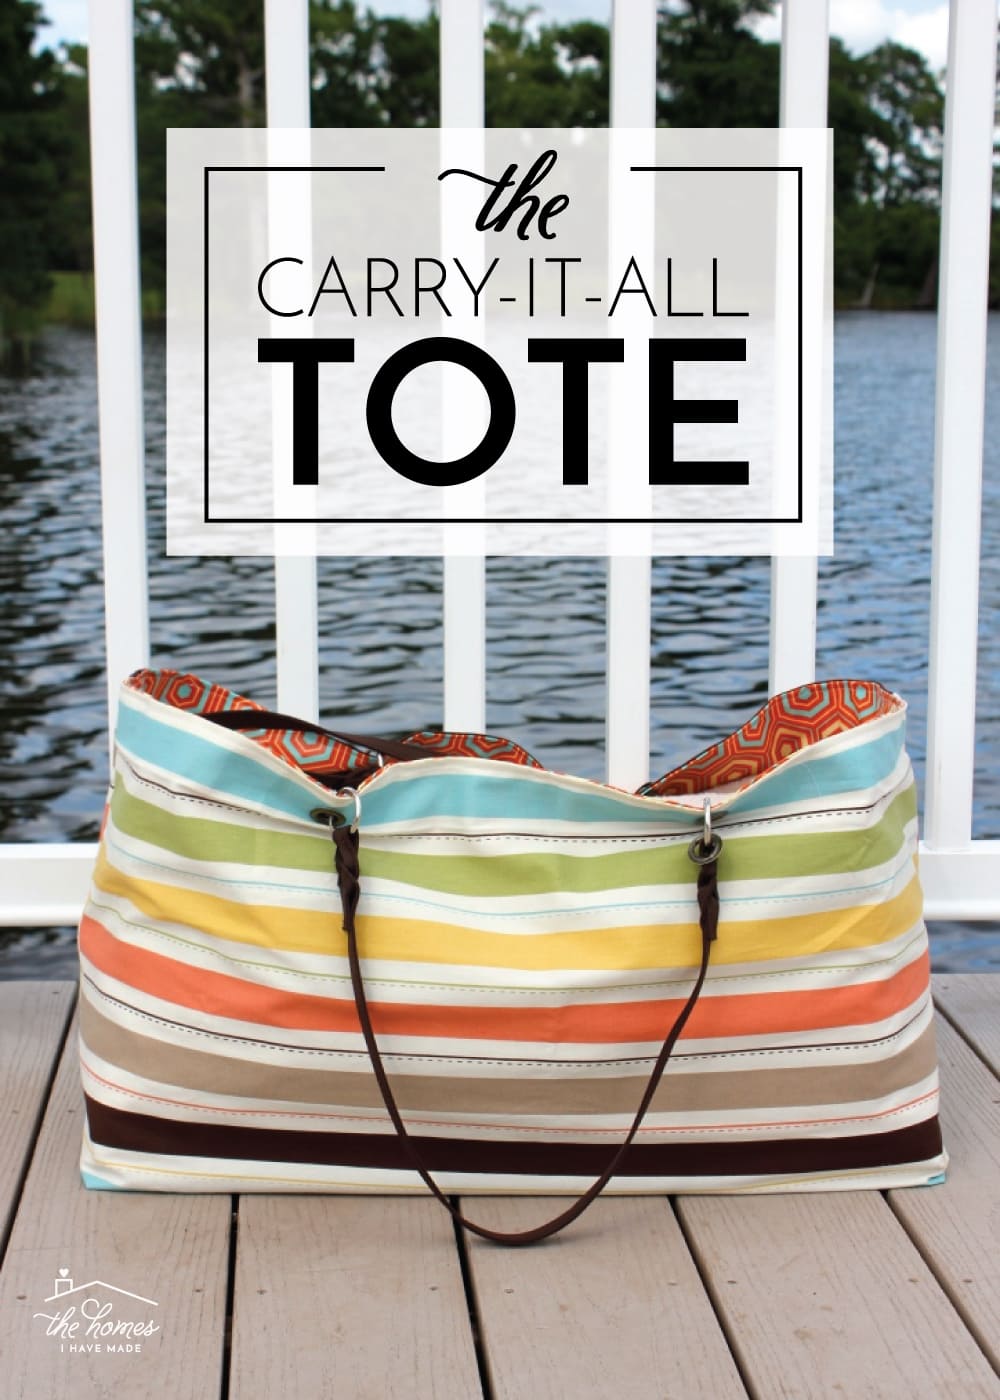 Carry-It-All Tote